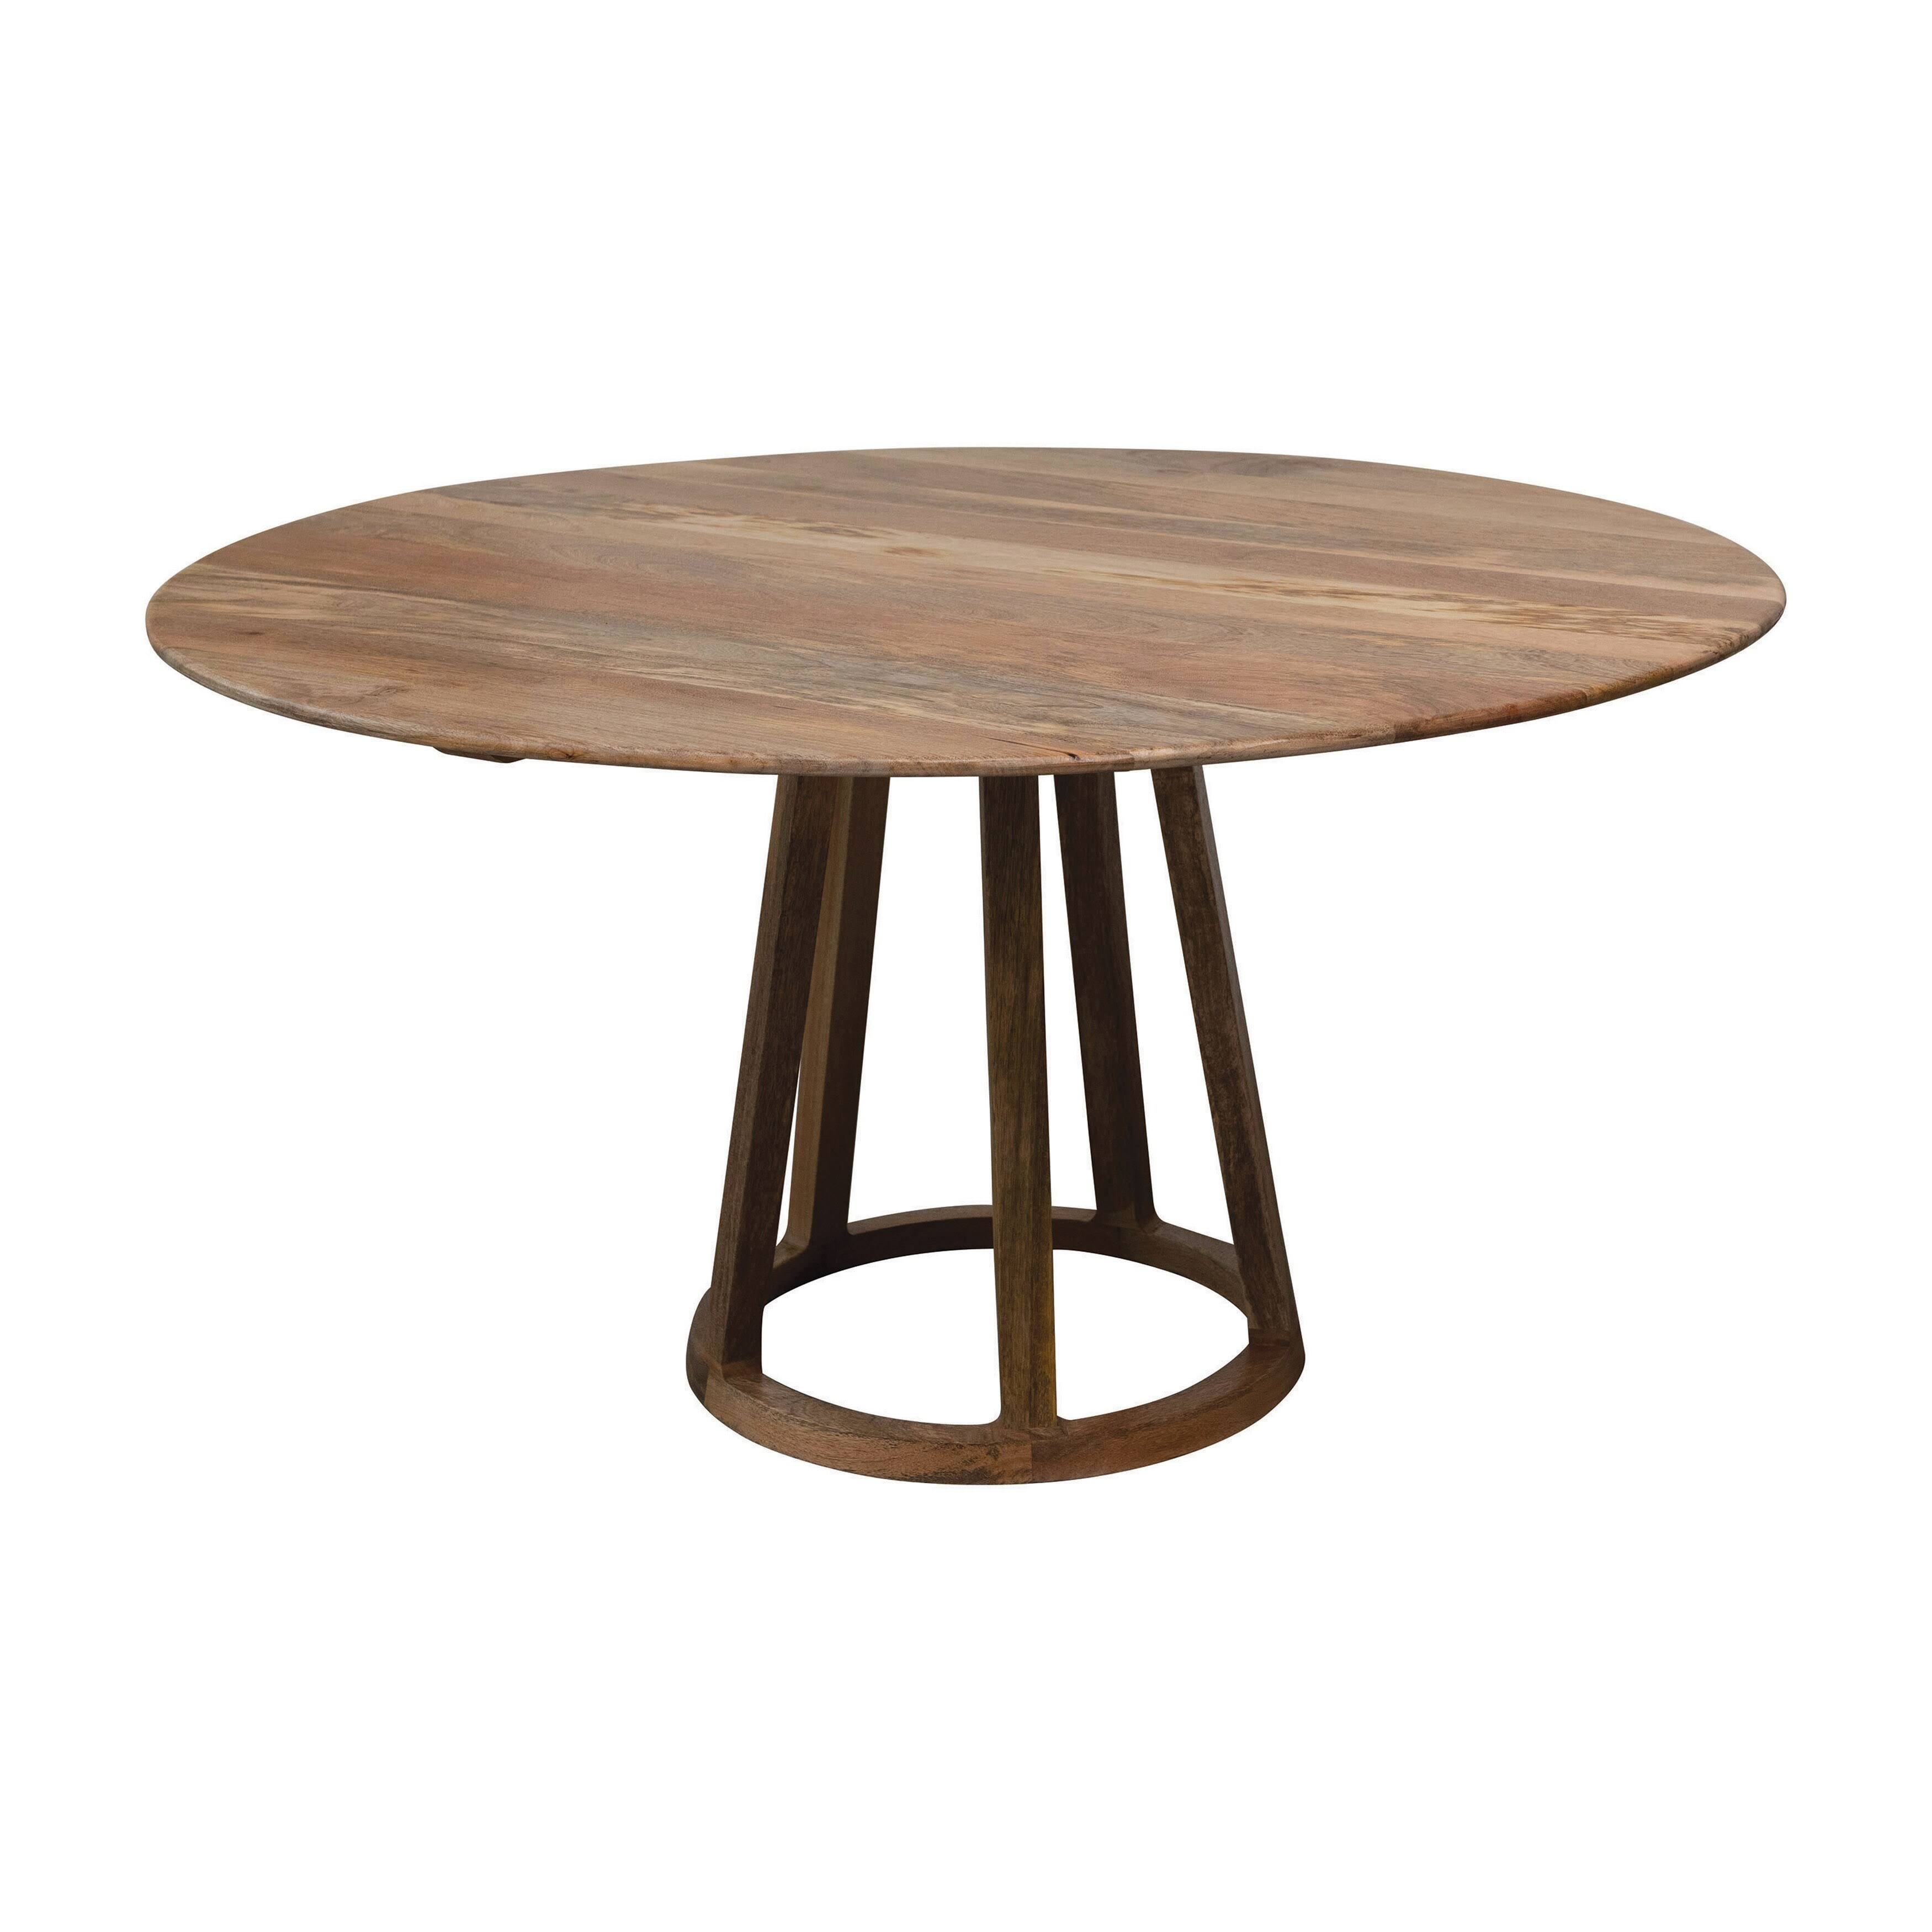 Mango Wood KD Round Coffee Table for Living Room | Image